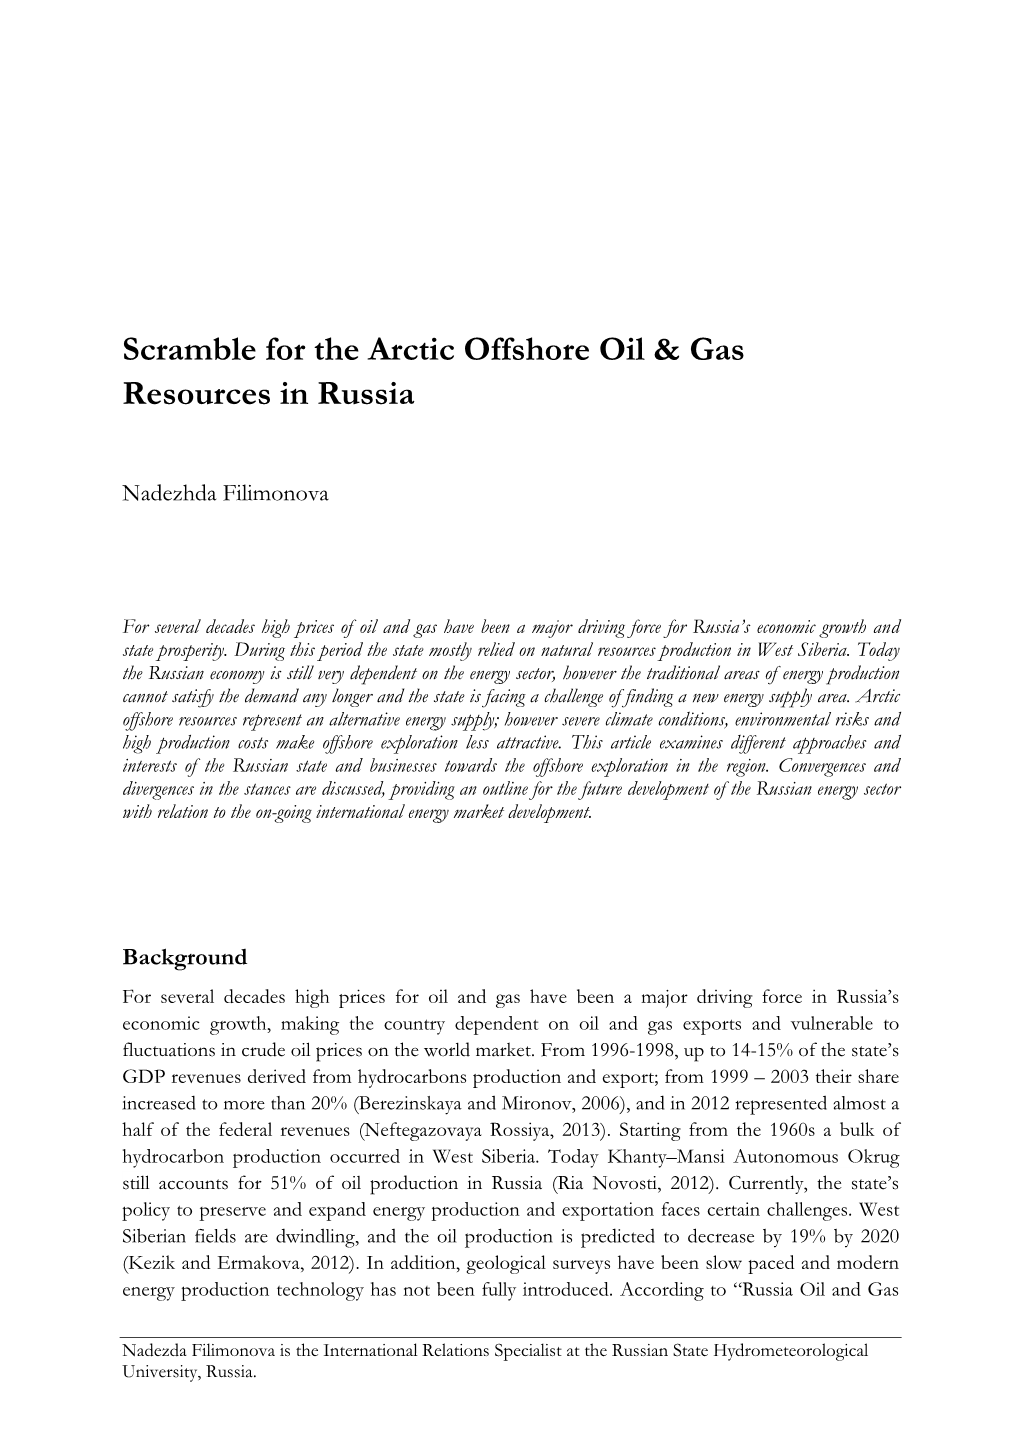 Scramble for the Arctic Offshore Oil & Gas Resources in Russia